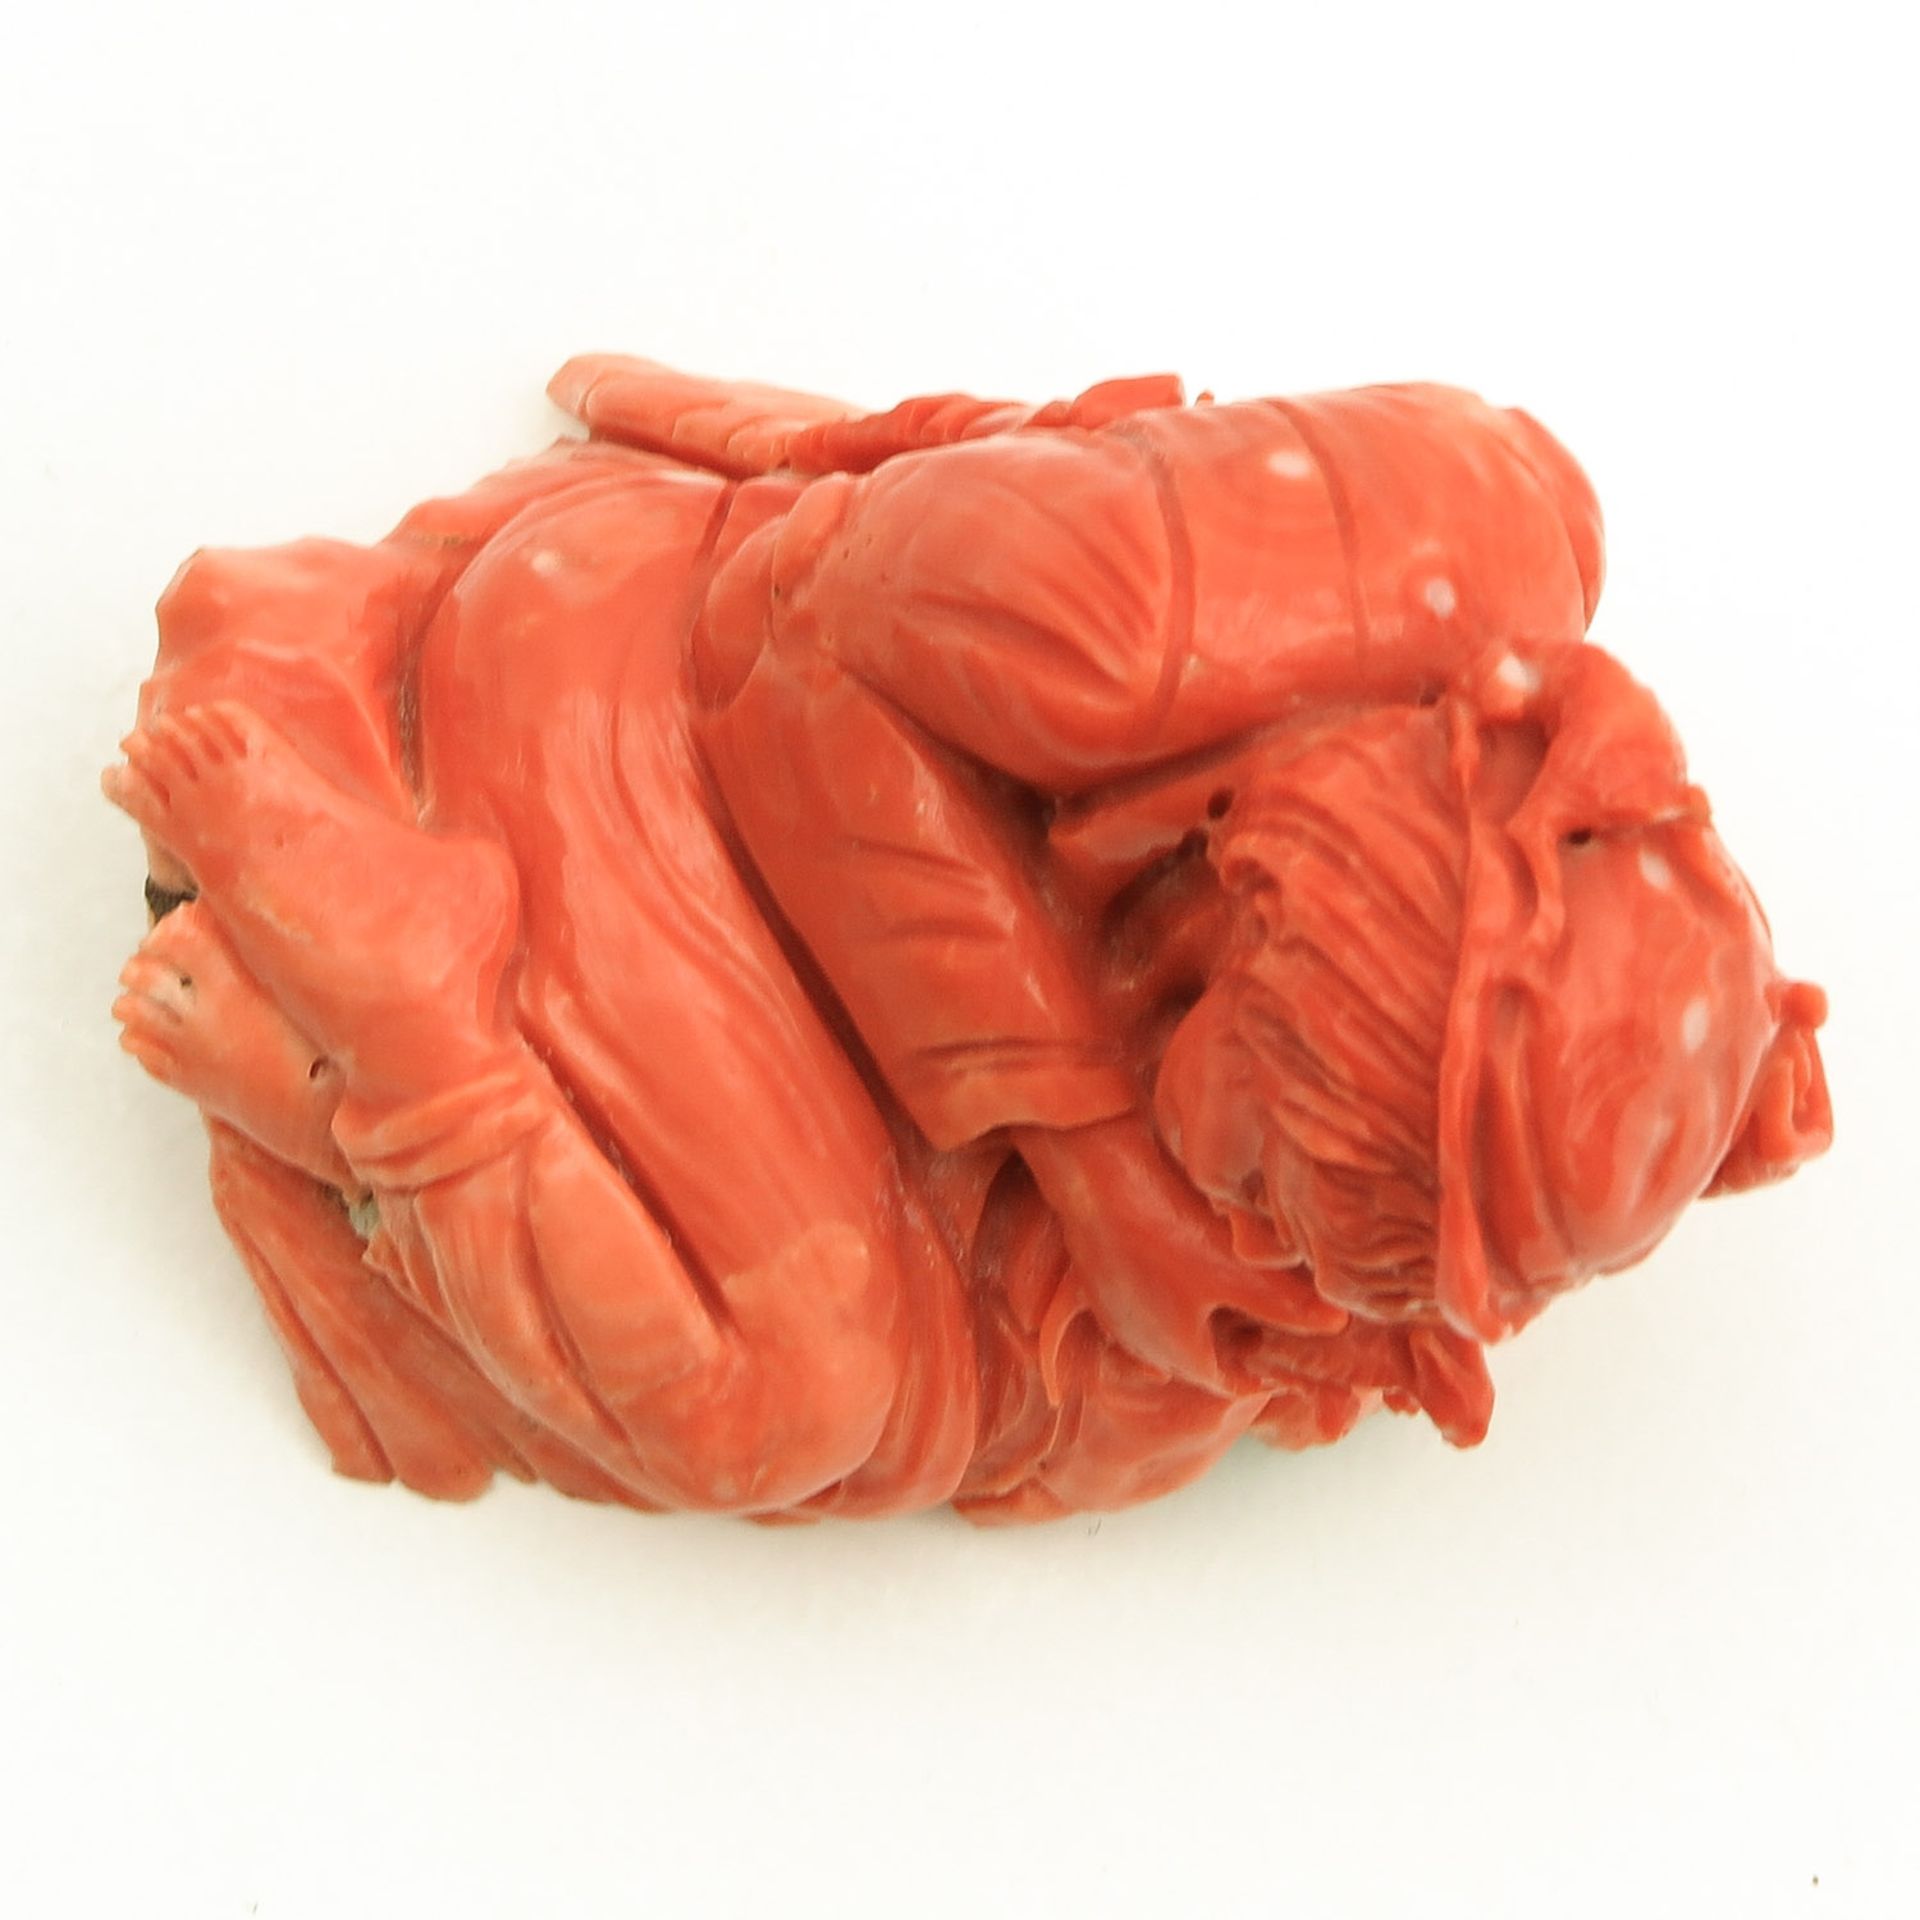 A Carved Coral Sculpture - Image 6 of 9